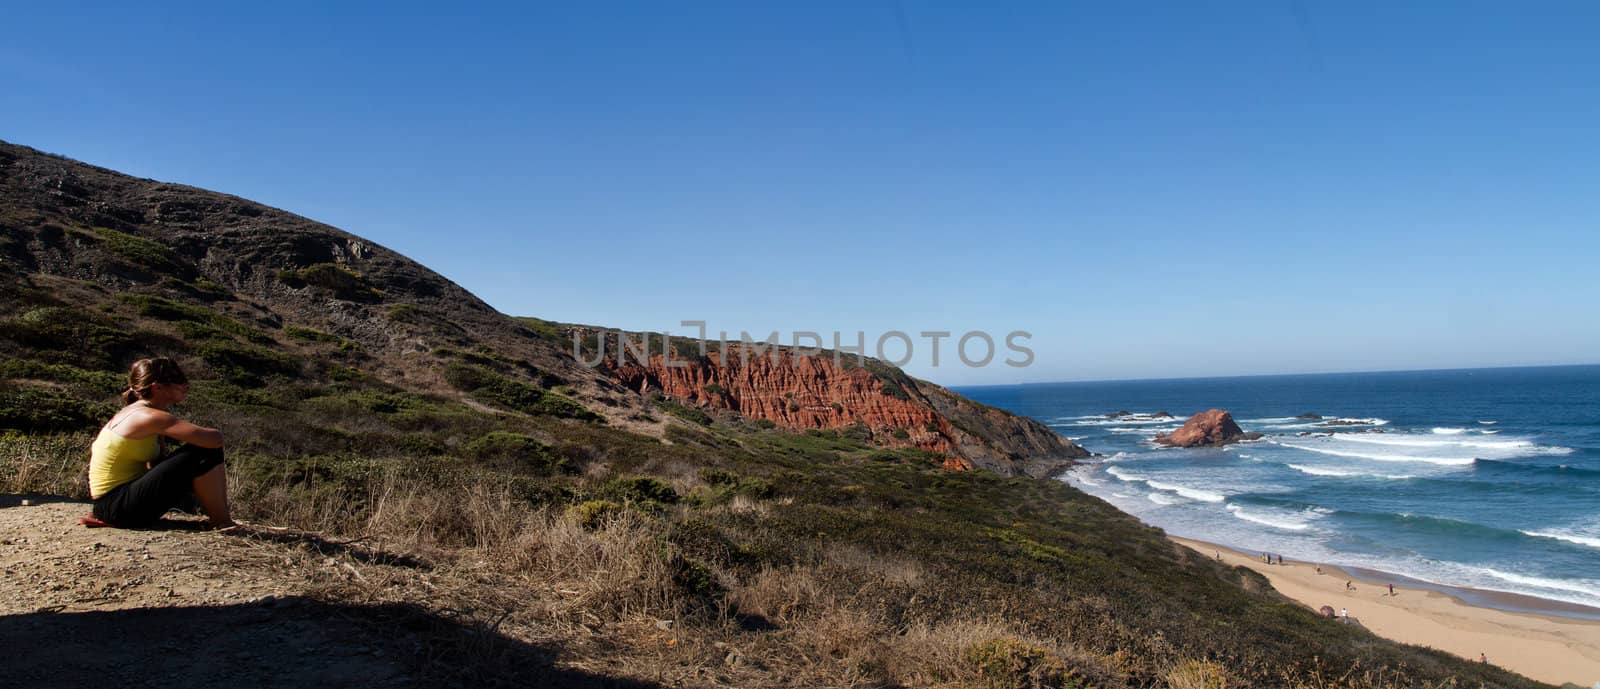 View of a young woman watching a beautiful landscape on the Sagres region.